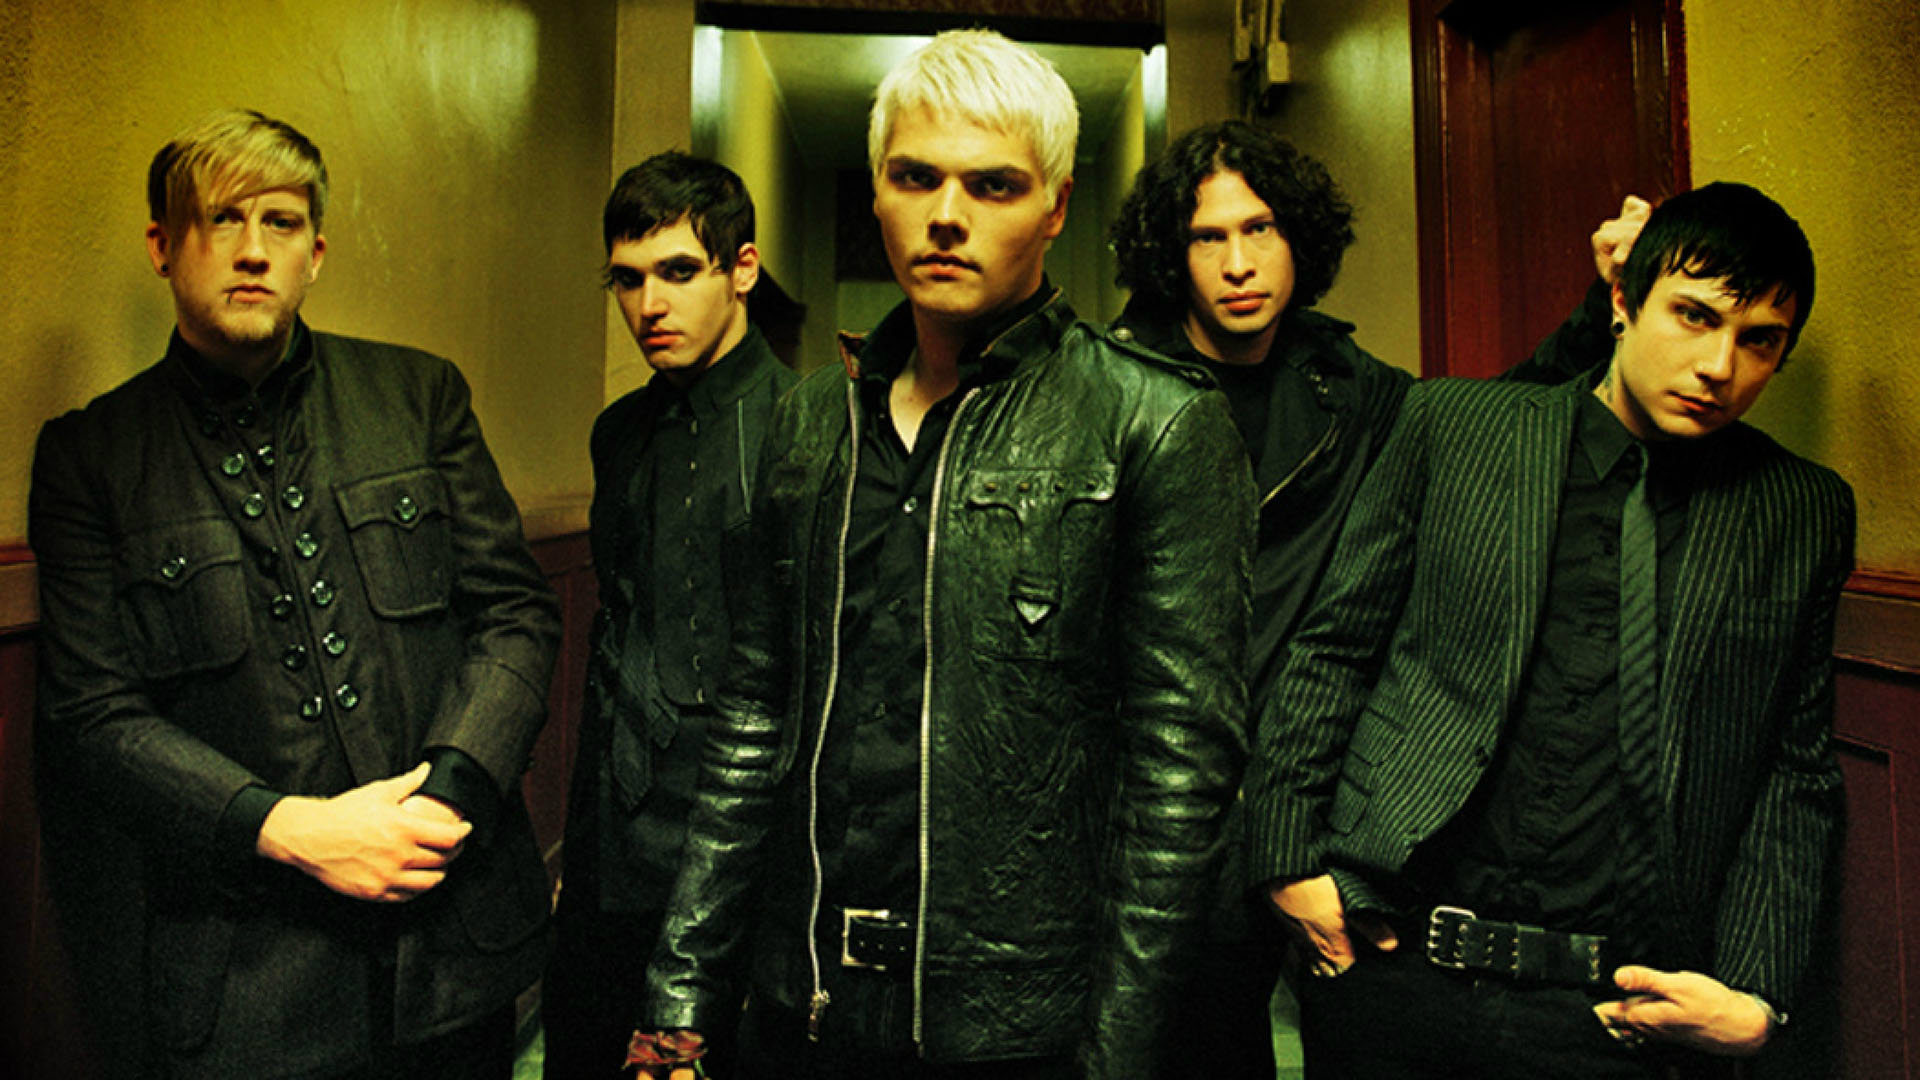 My chemical romance thank fans for unbelievable response to reunion show